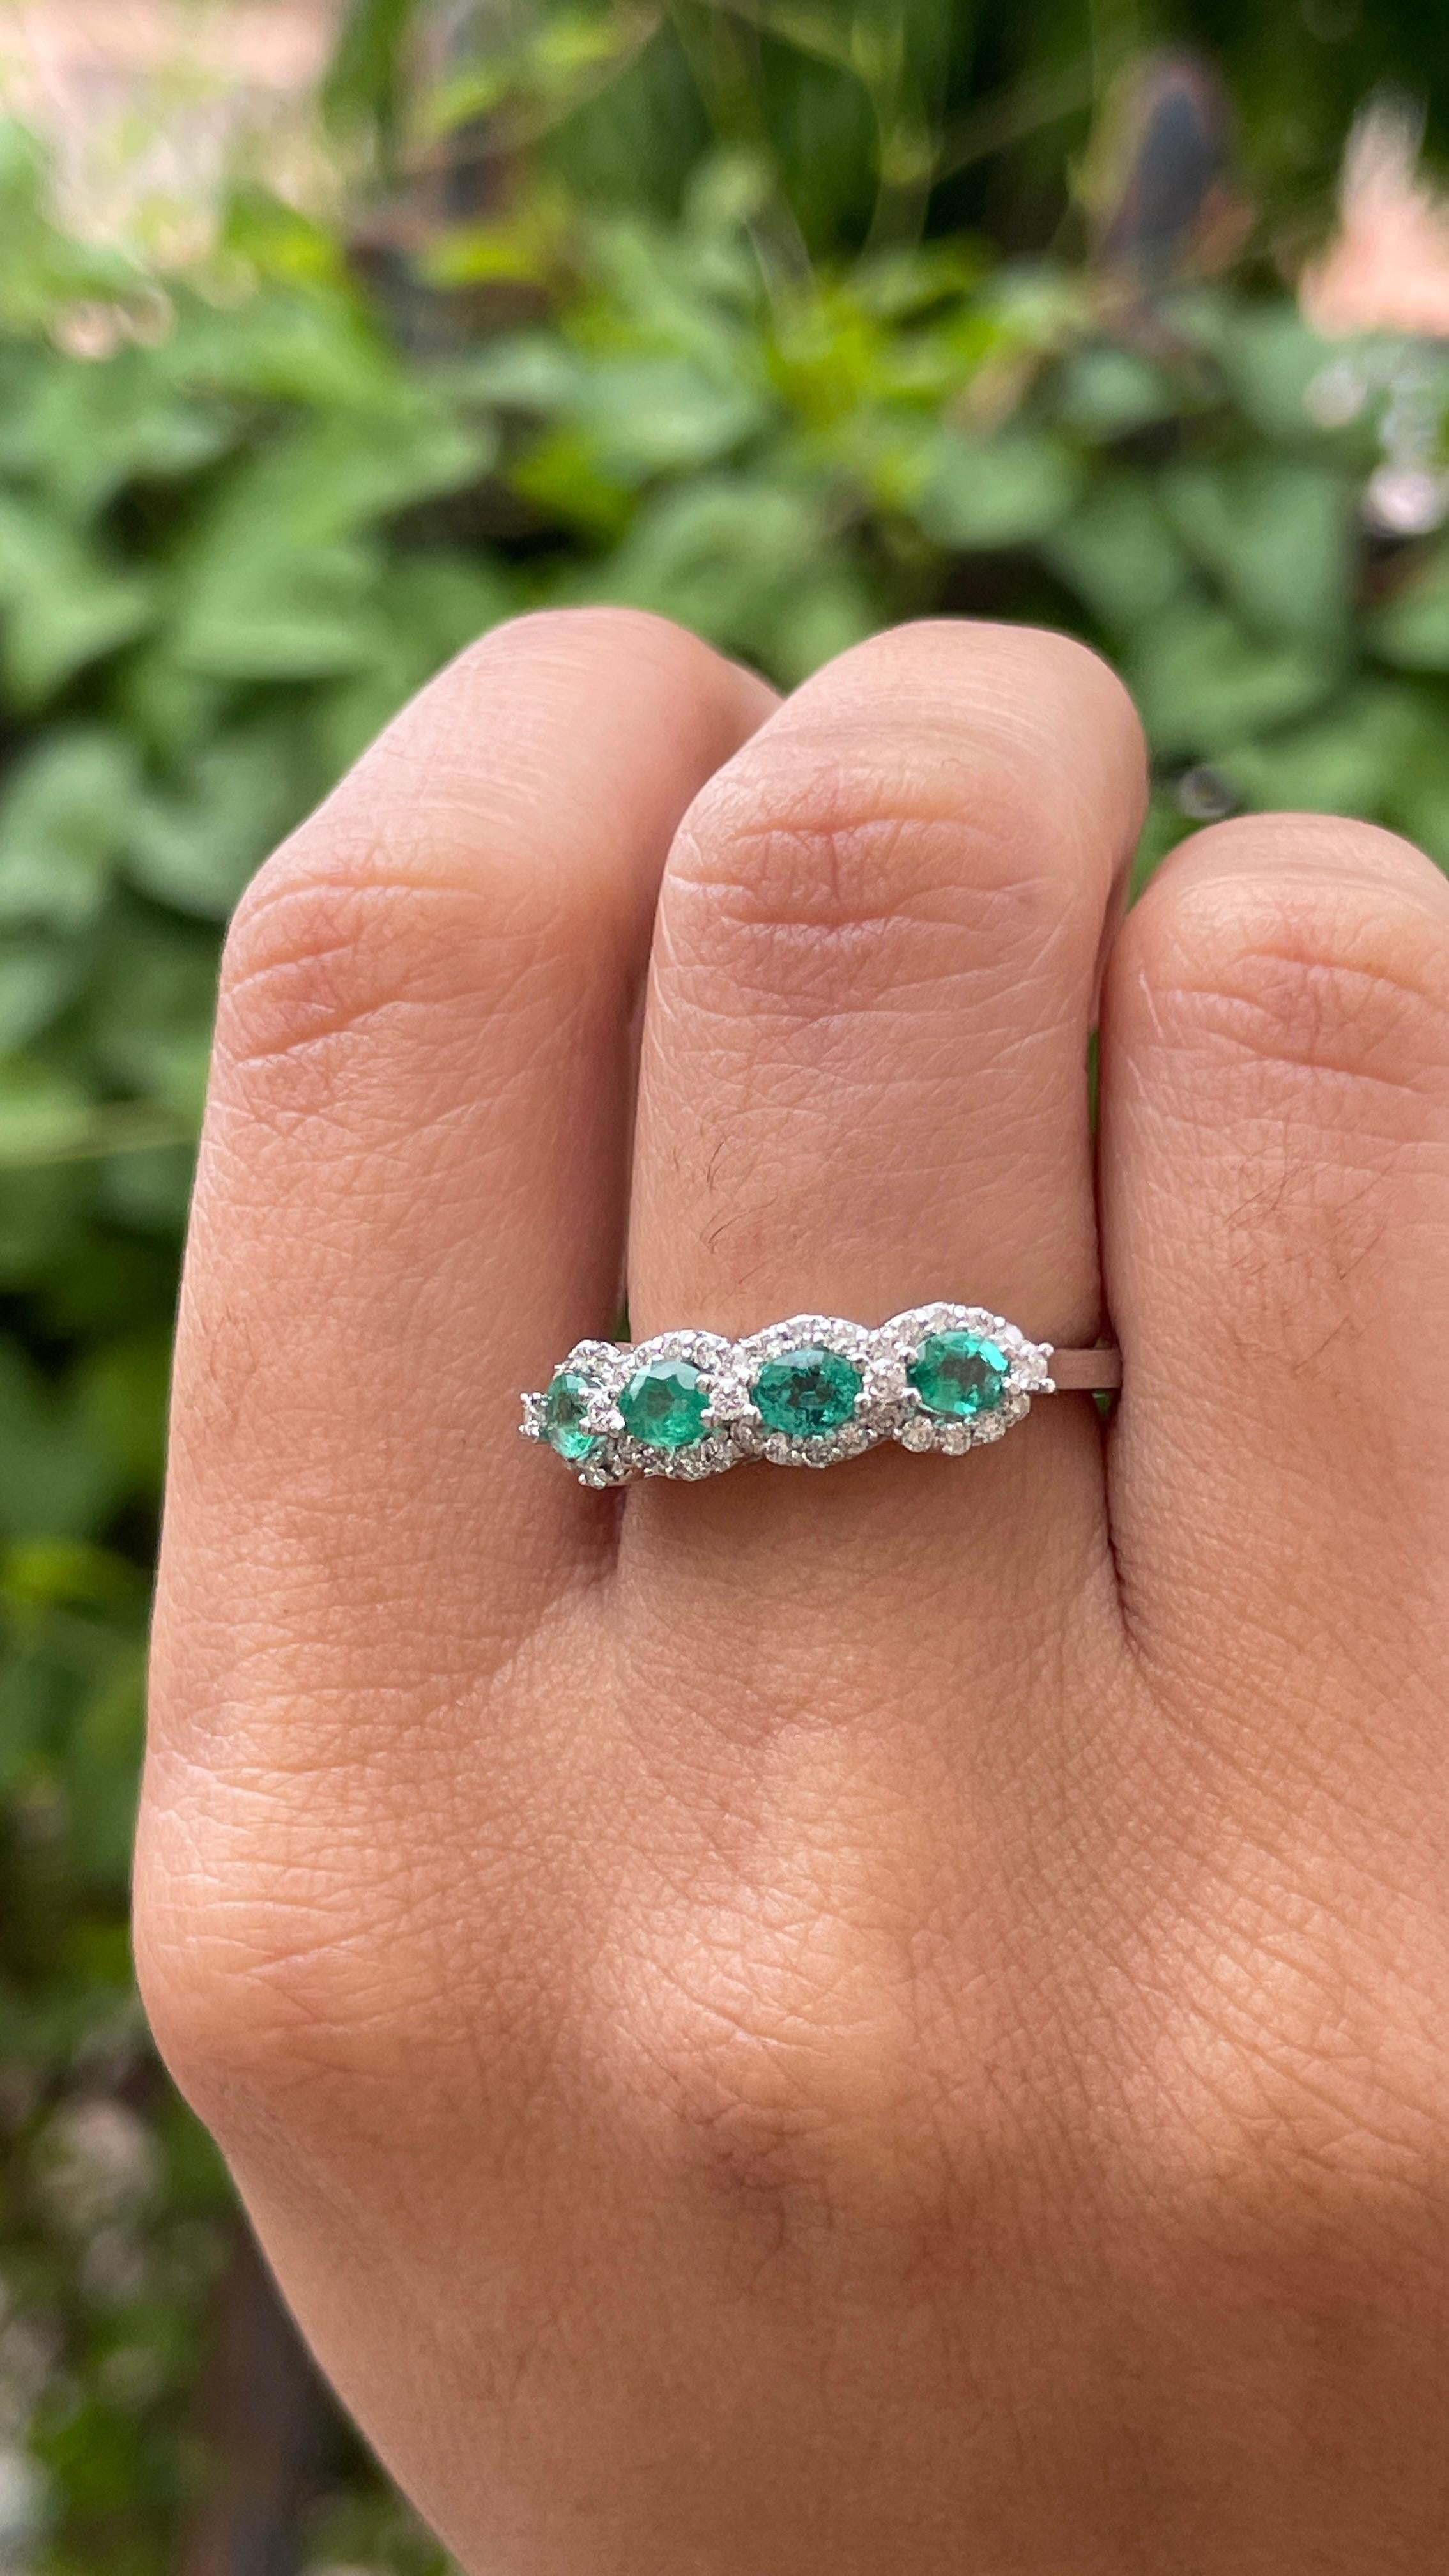 For Sale:  18K White Gold Emerald and Diamond Ring  5